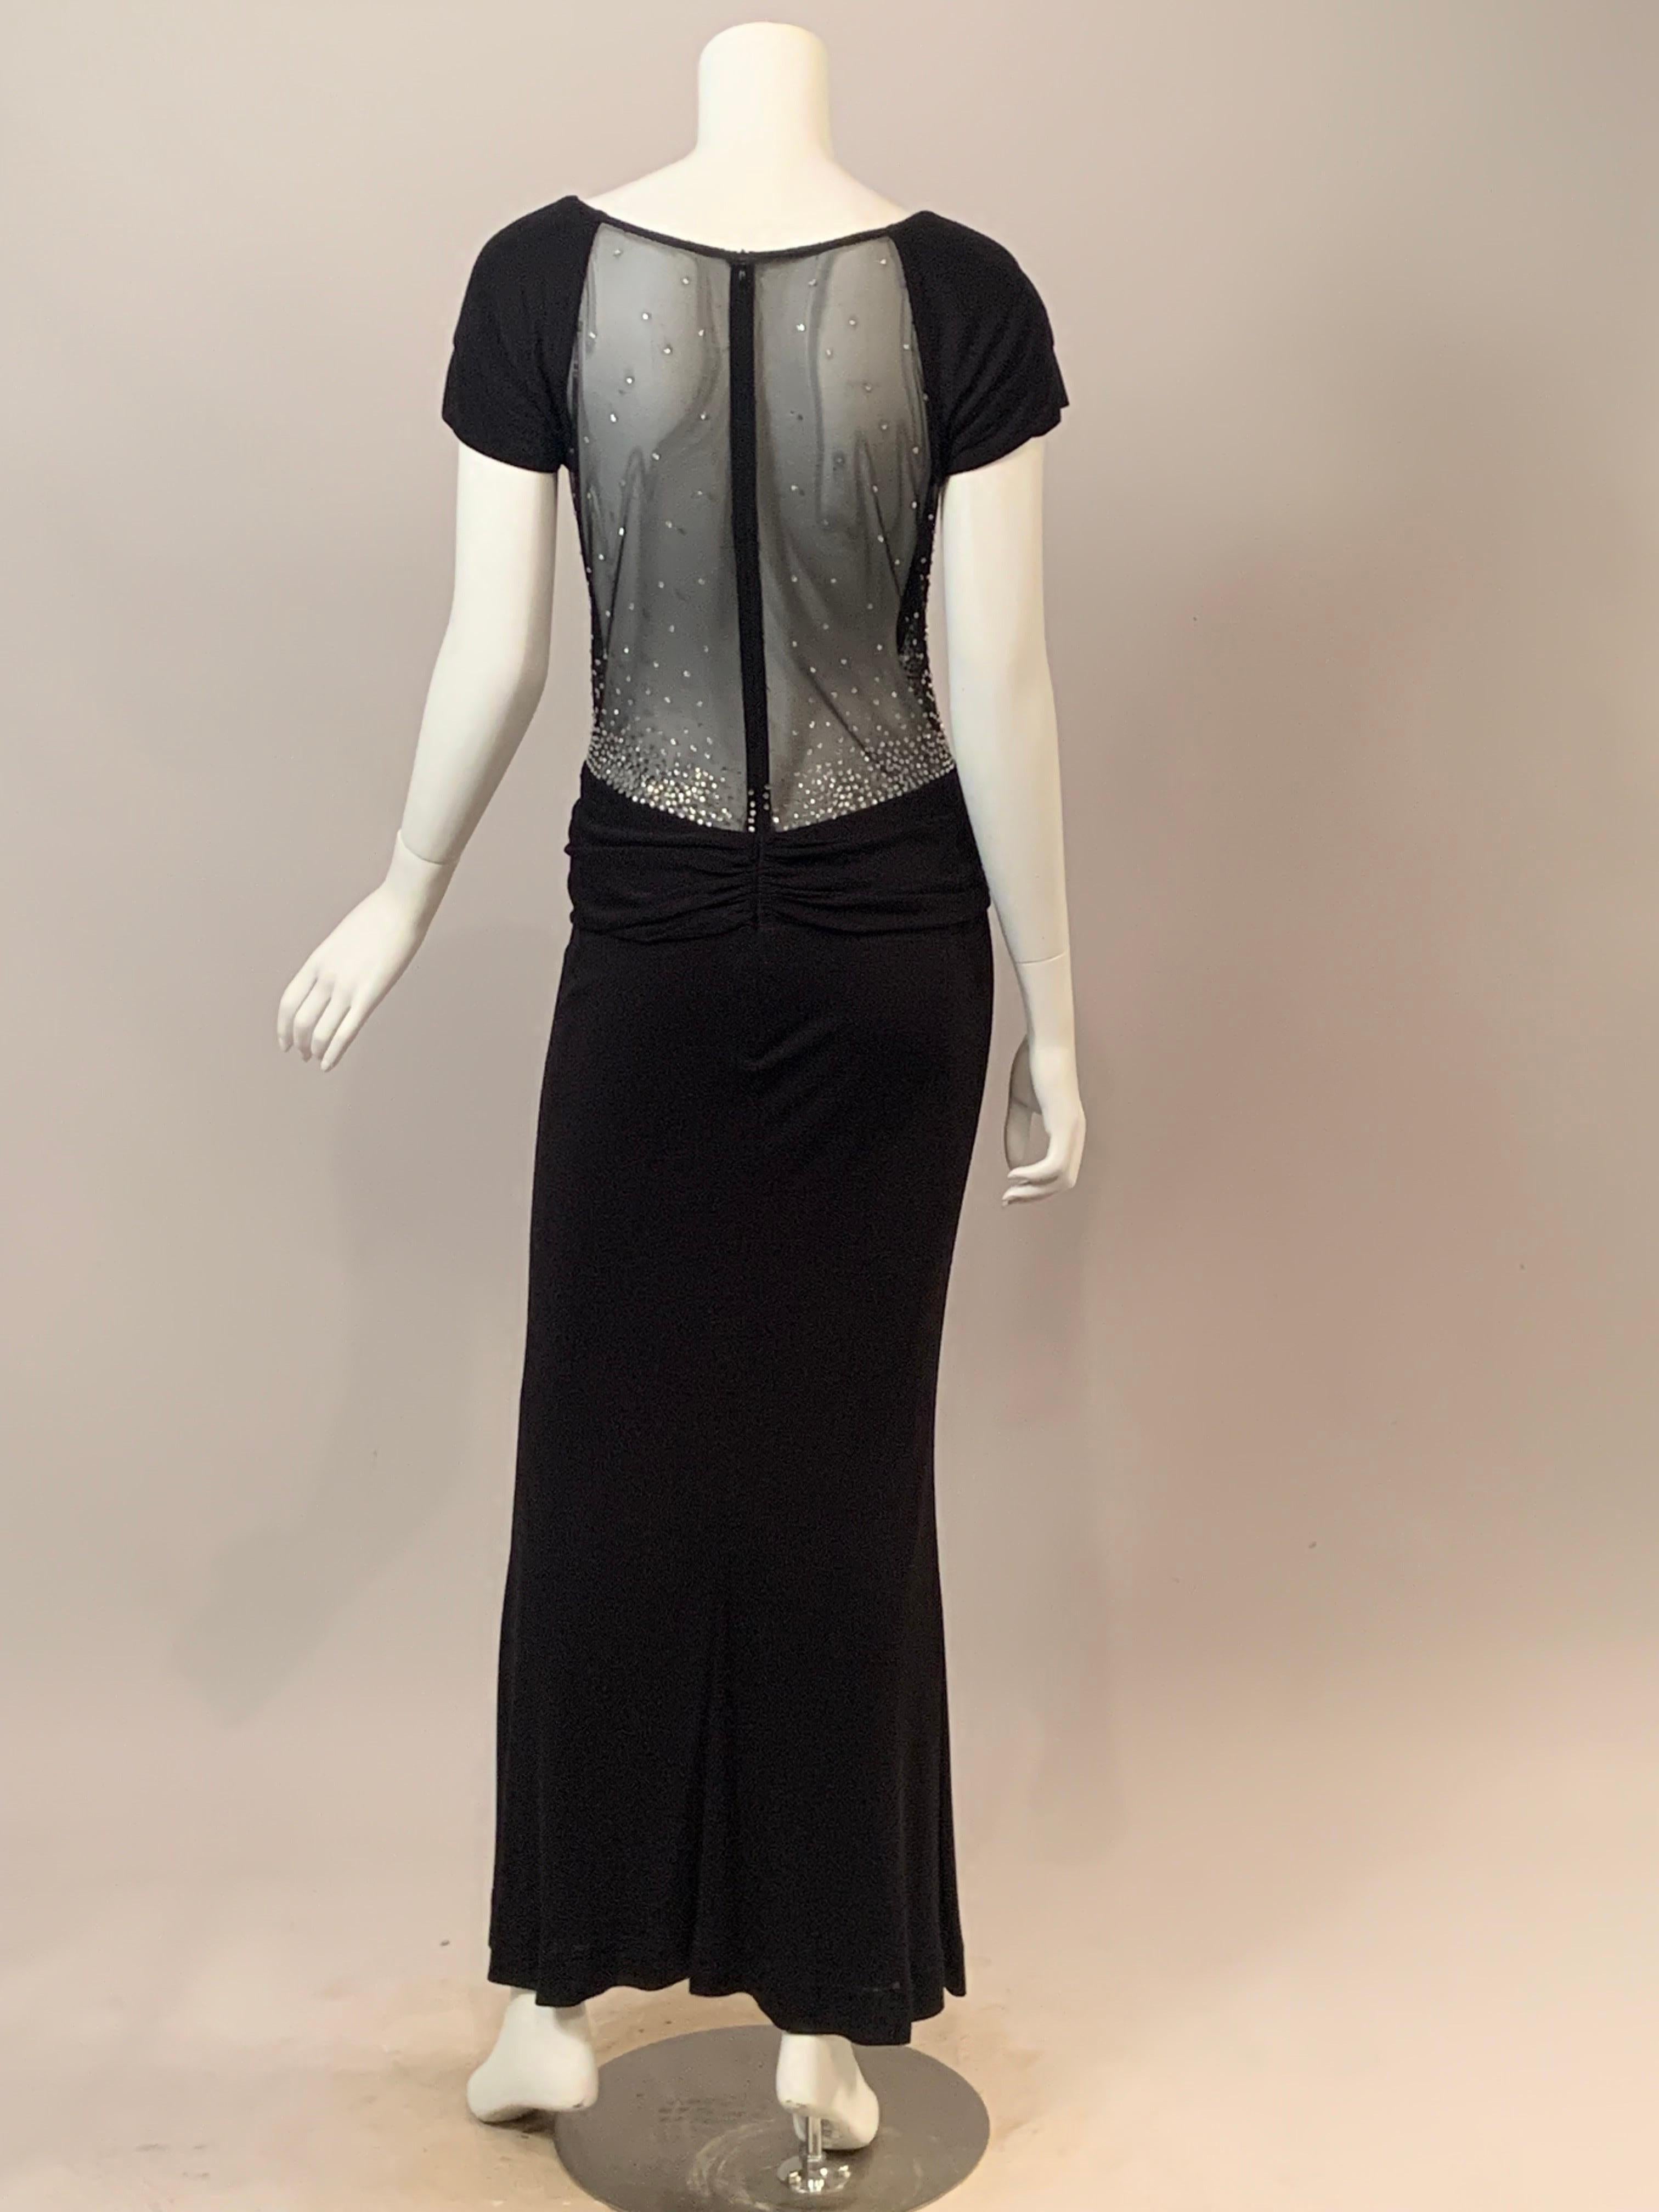 Sexy Black Gown with Rhinestone Studded Sheer Back and Sides For Sale 5